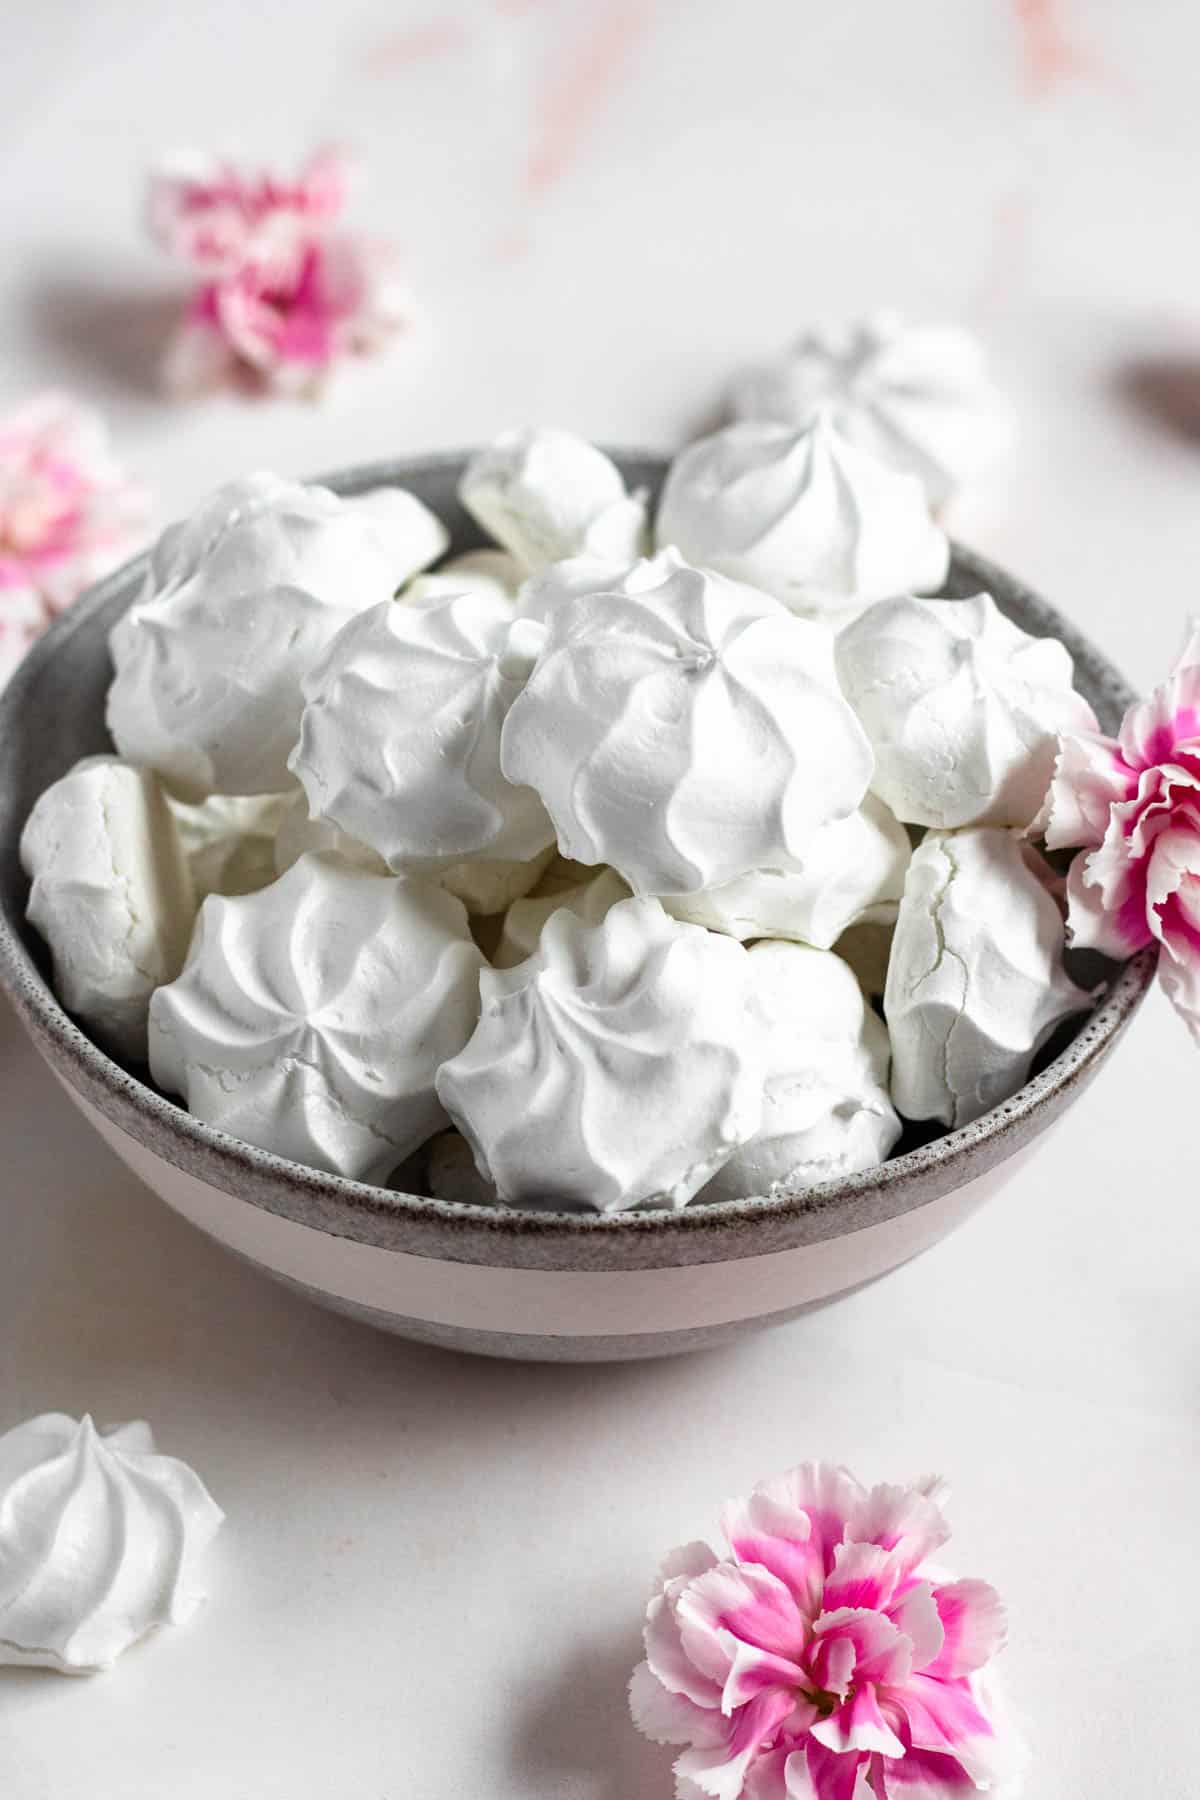 Bowl of white suspiros in a bowl with pink and white flowers on the side of the bowl. 